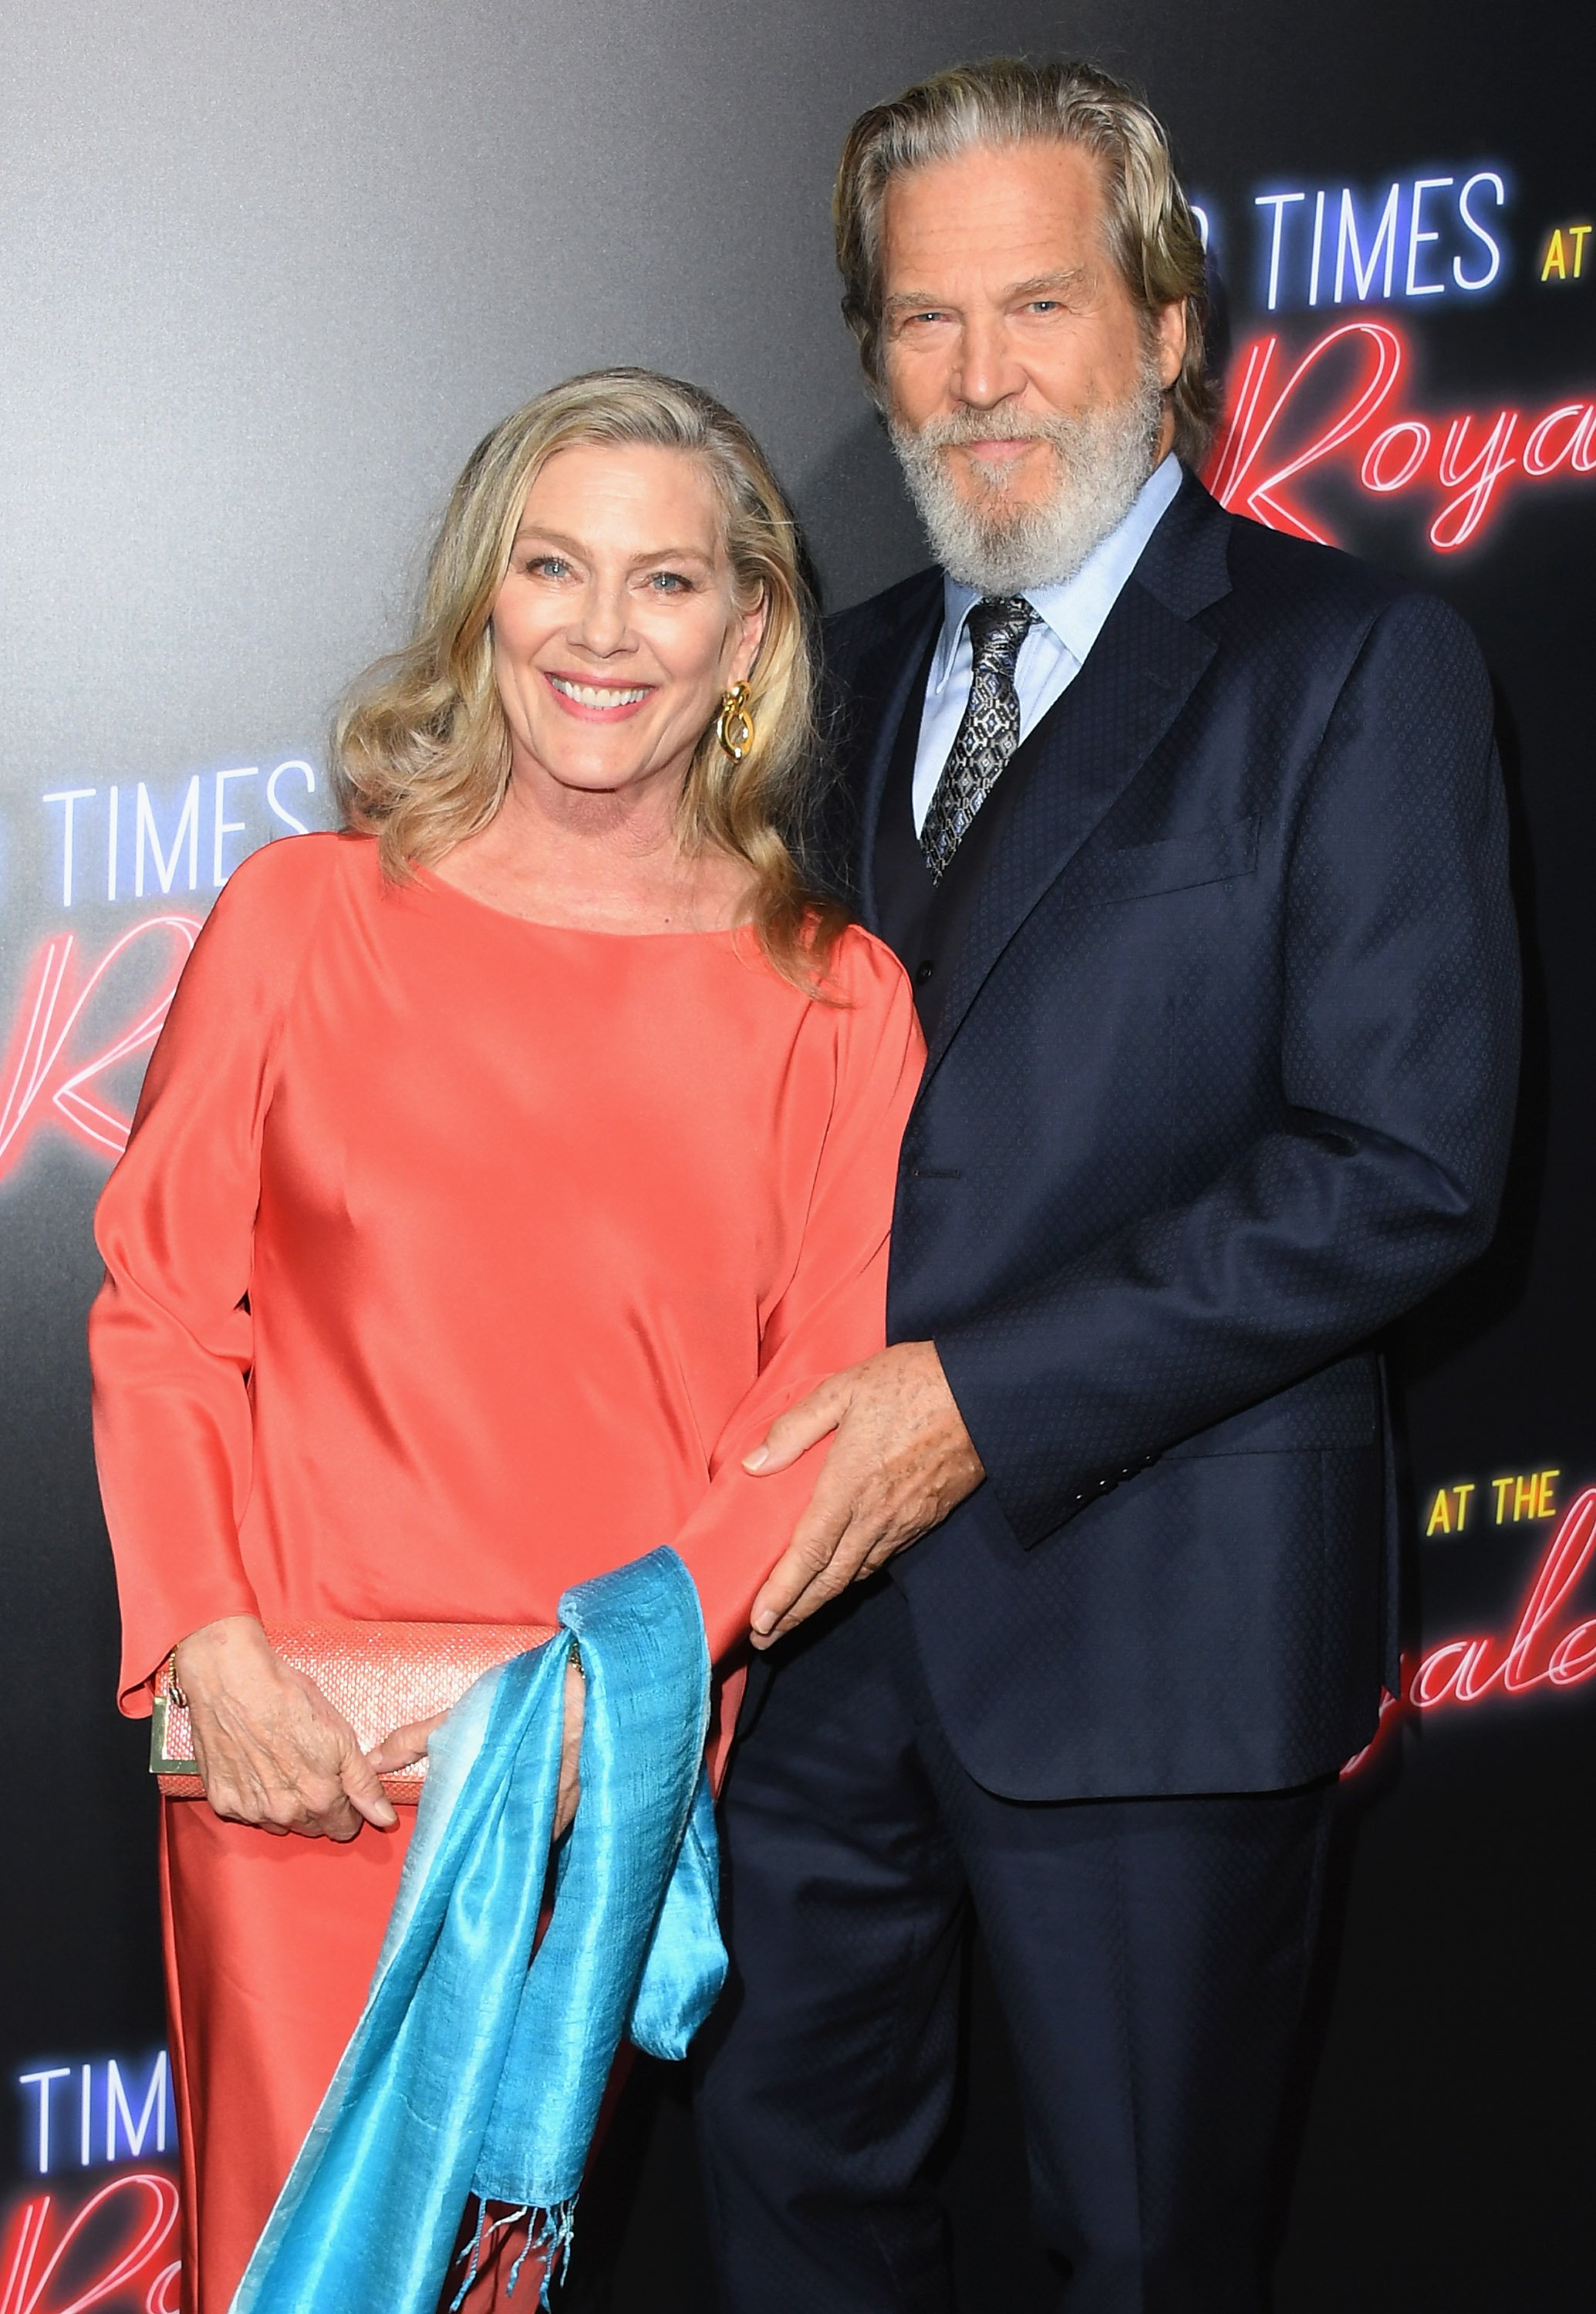 Susan Geston and Jeff Bridges attend the premiere of 20th Century FOX's "Bad Times At The El Royale" at TCL Chinese Theatre on September 22, 2018 in Hollywood, California. | Source: Getty Images